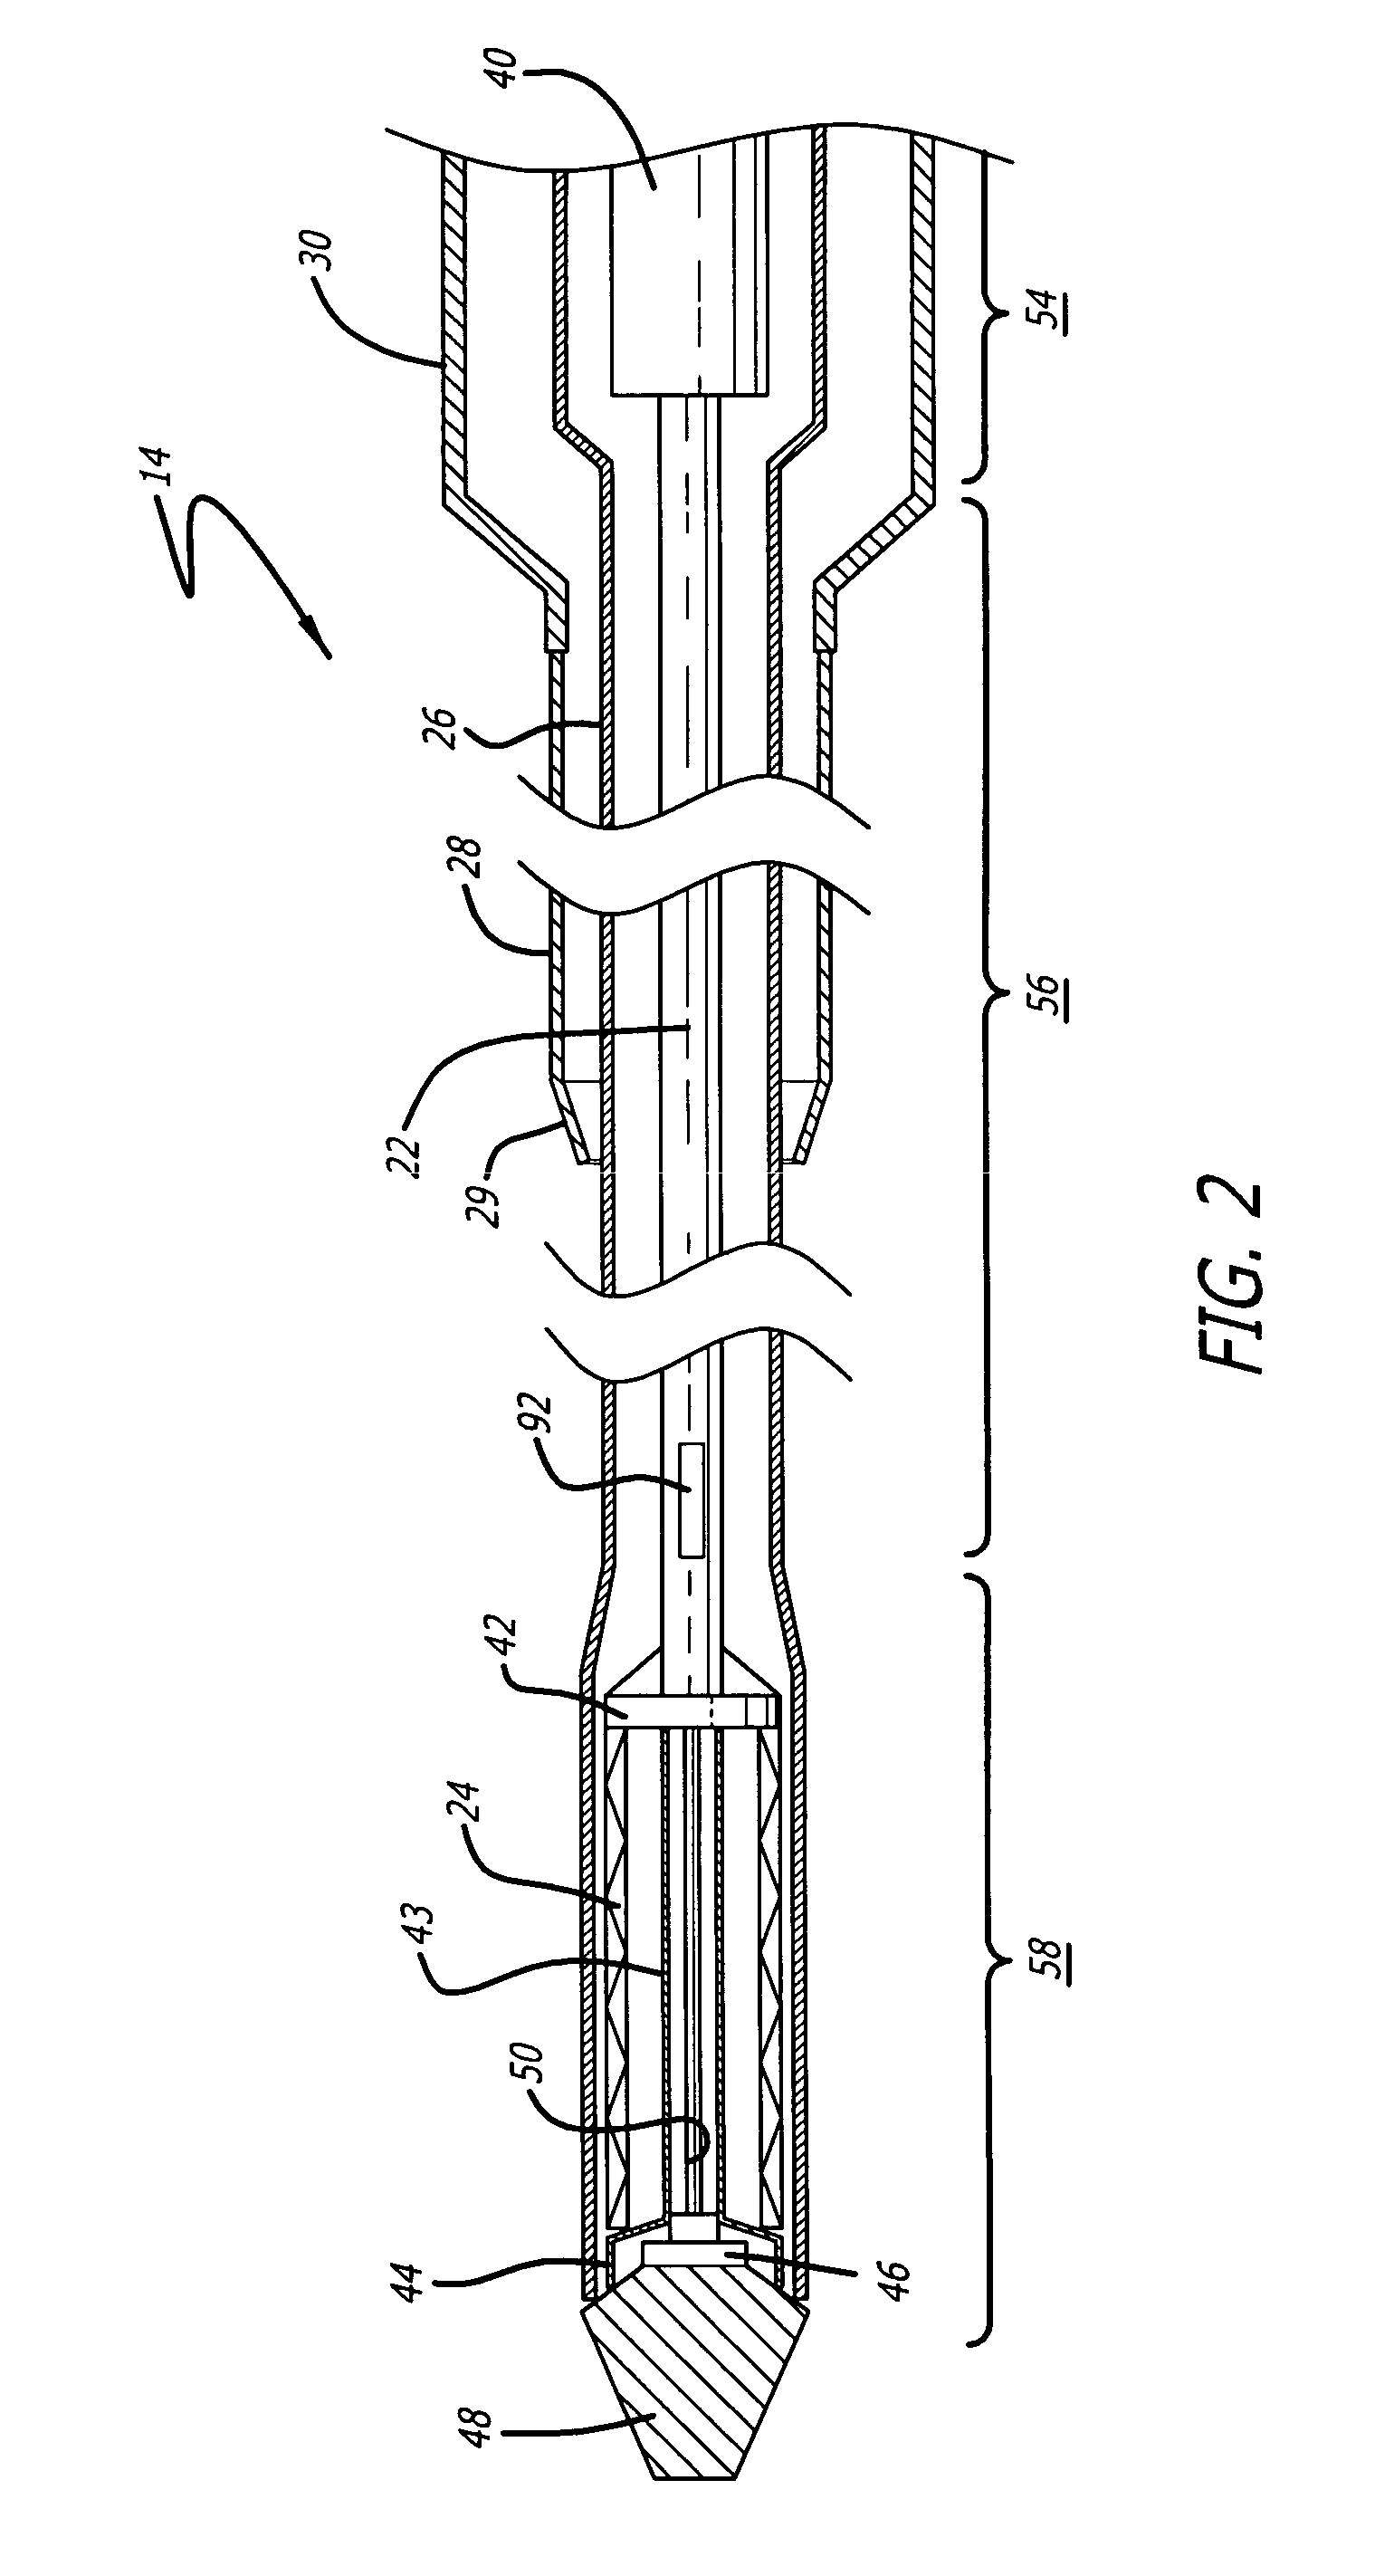 Delivery system for medical devices